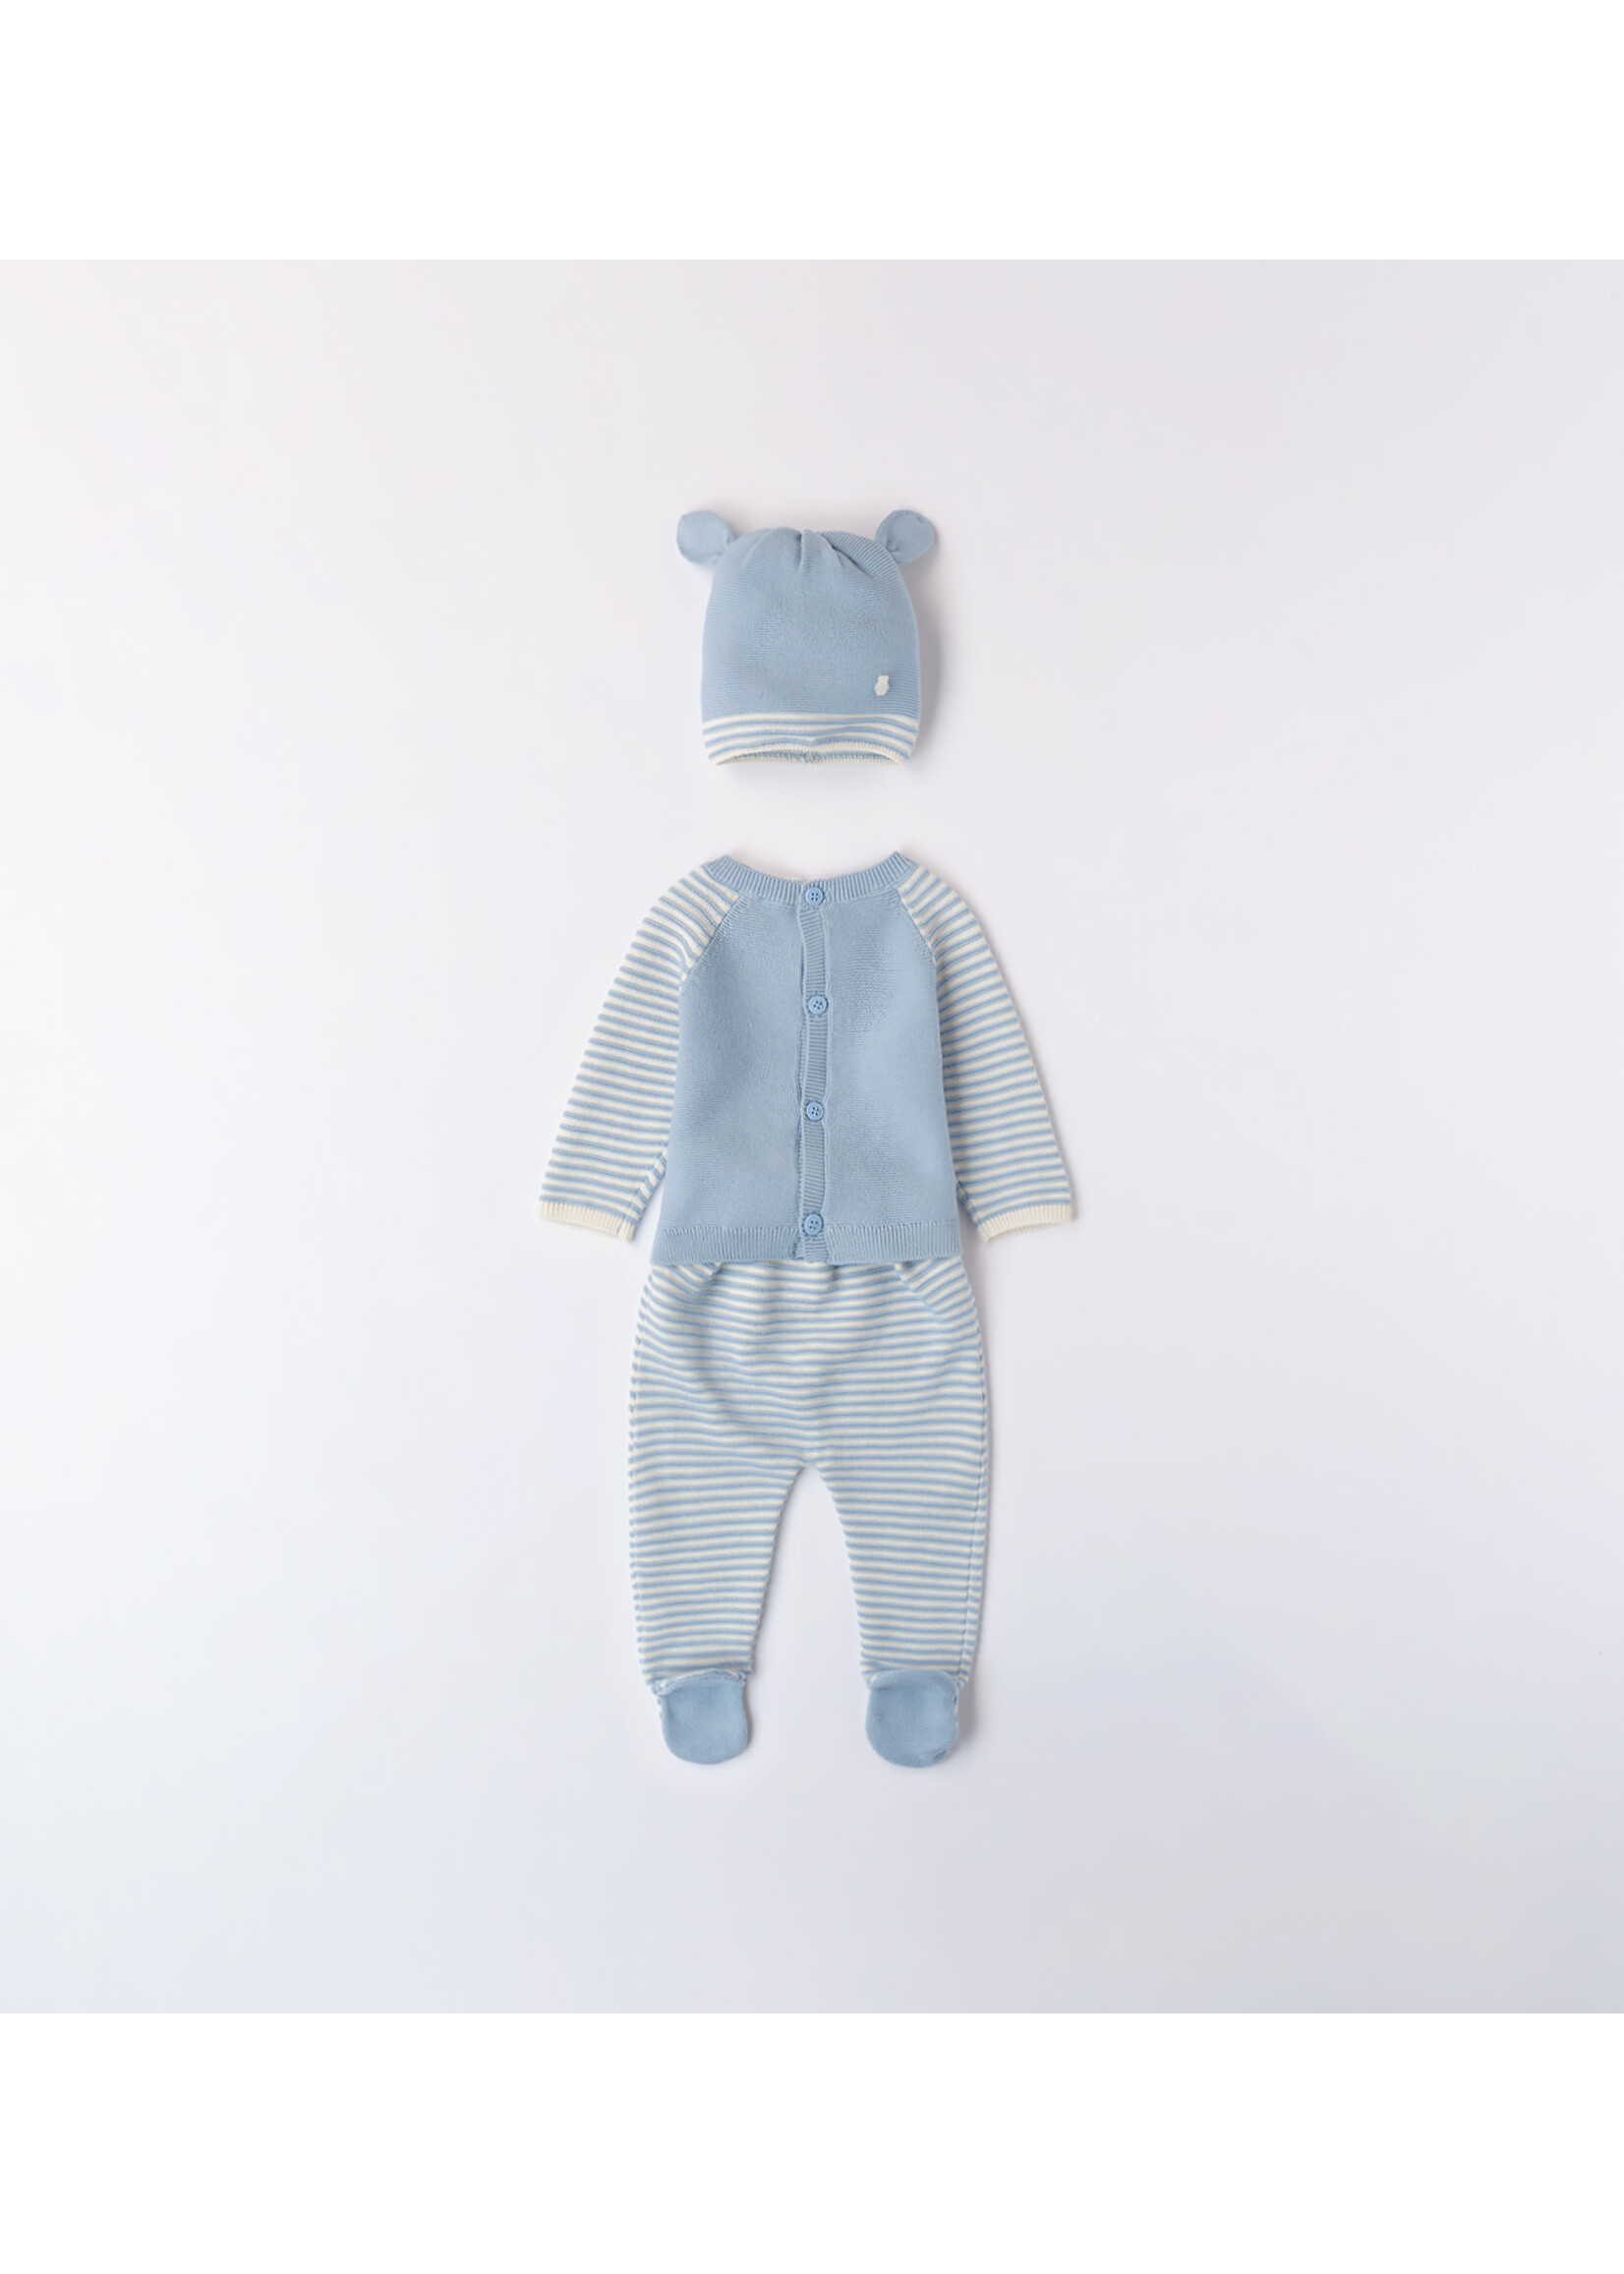 Ido 38617 TWO PIECES ROMPERS SUIT WITH FEET BLUE